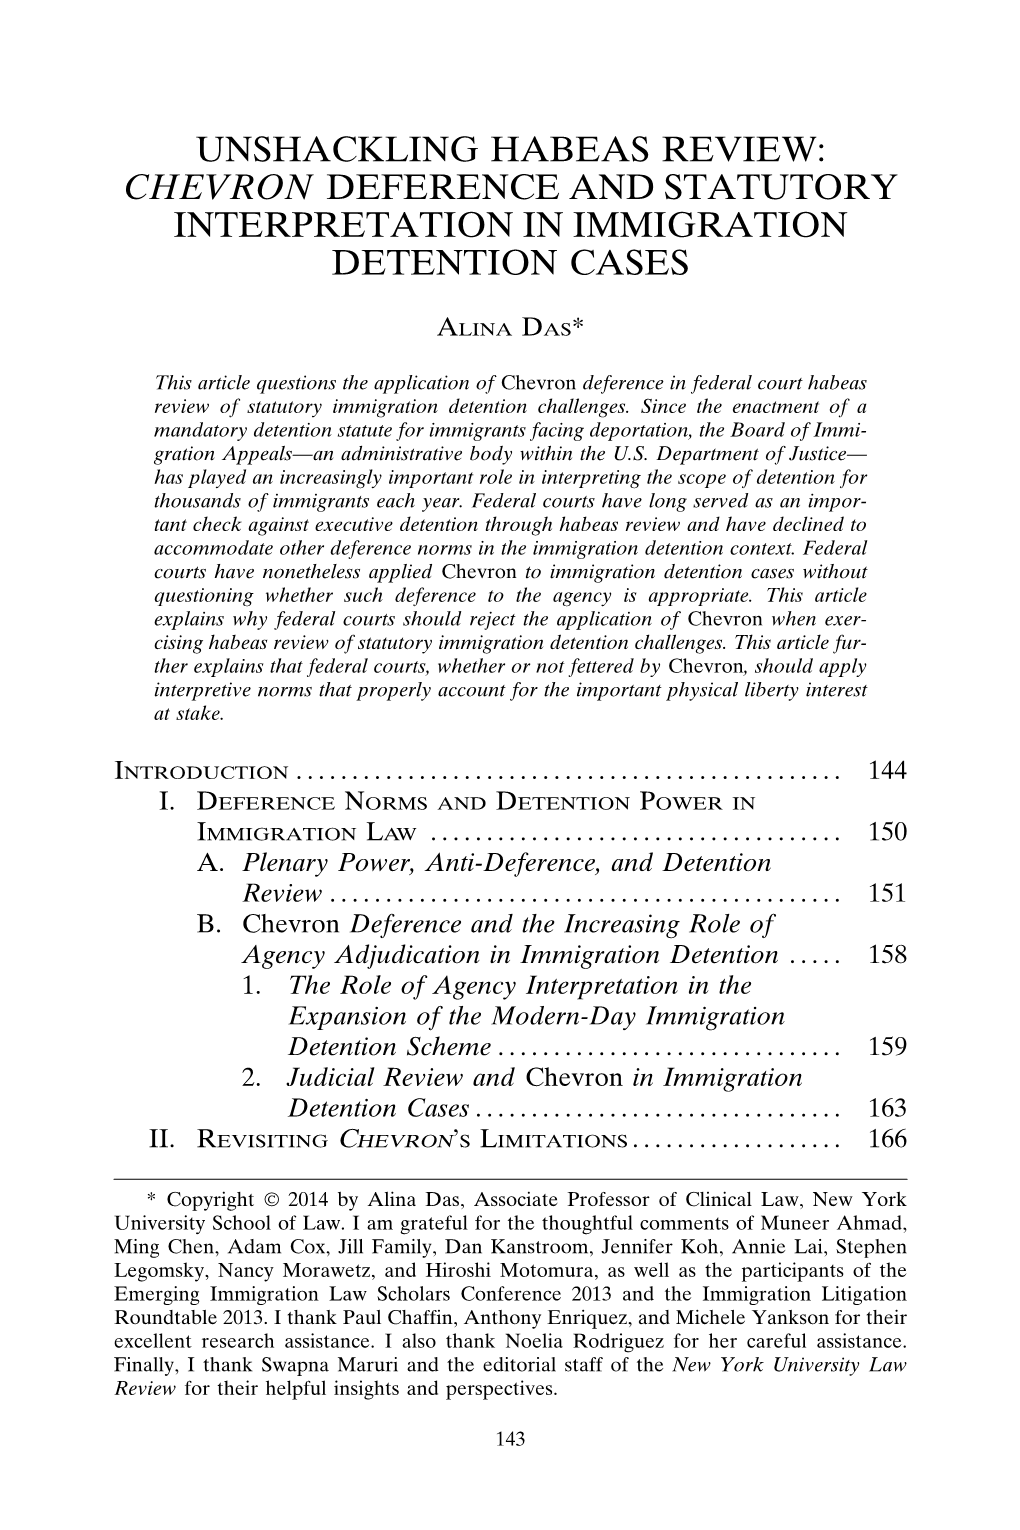 Chevron Deference and Statutory Interpretation in Immigration Detention Cases